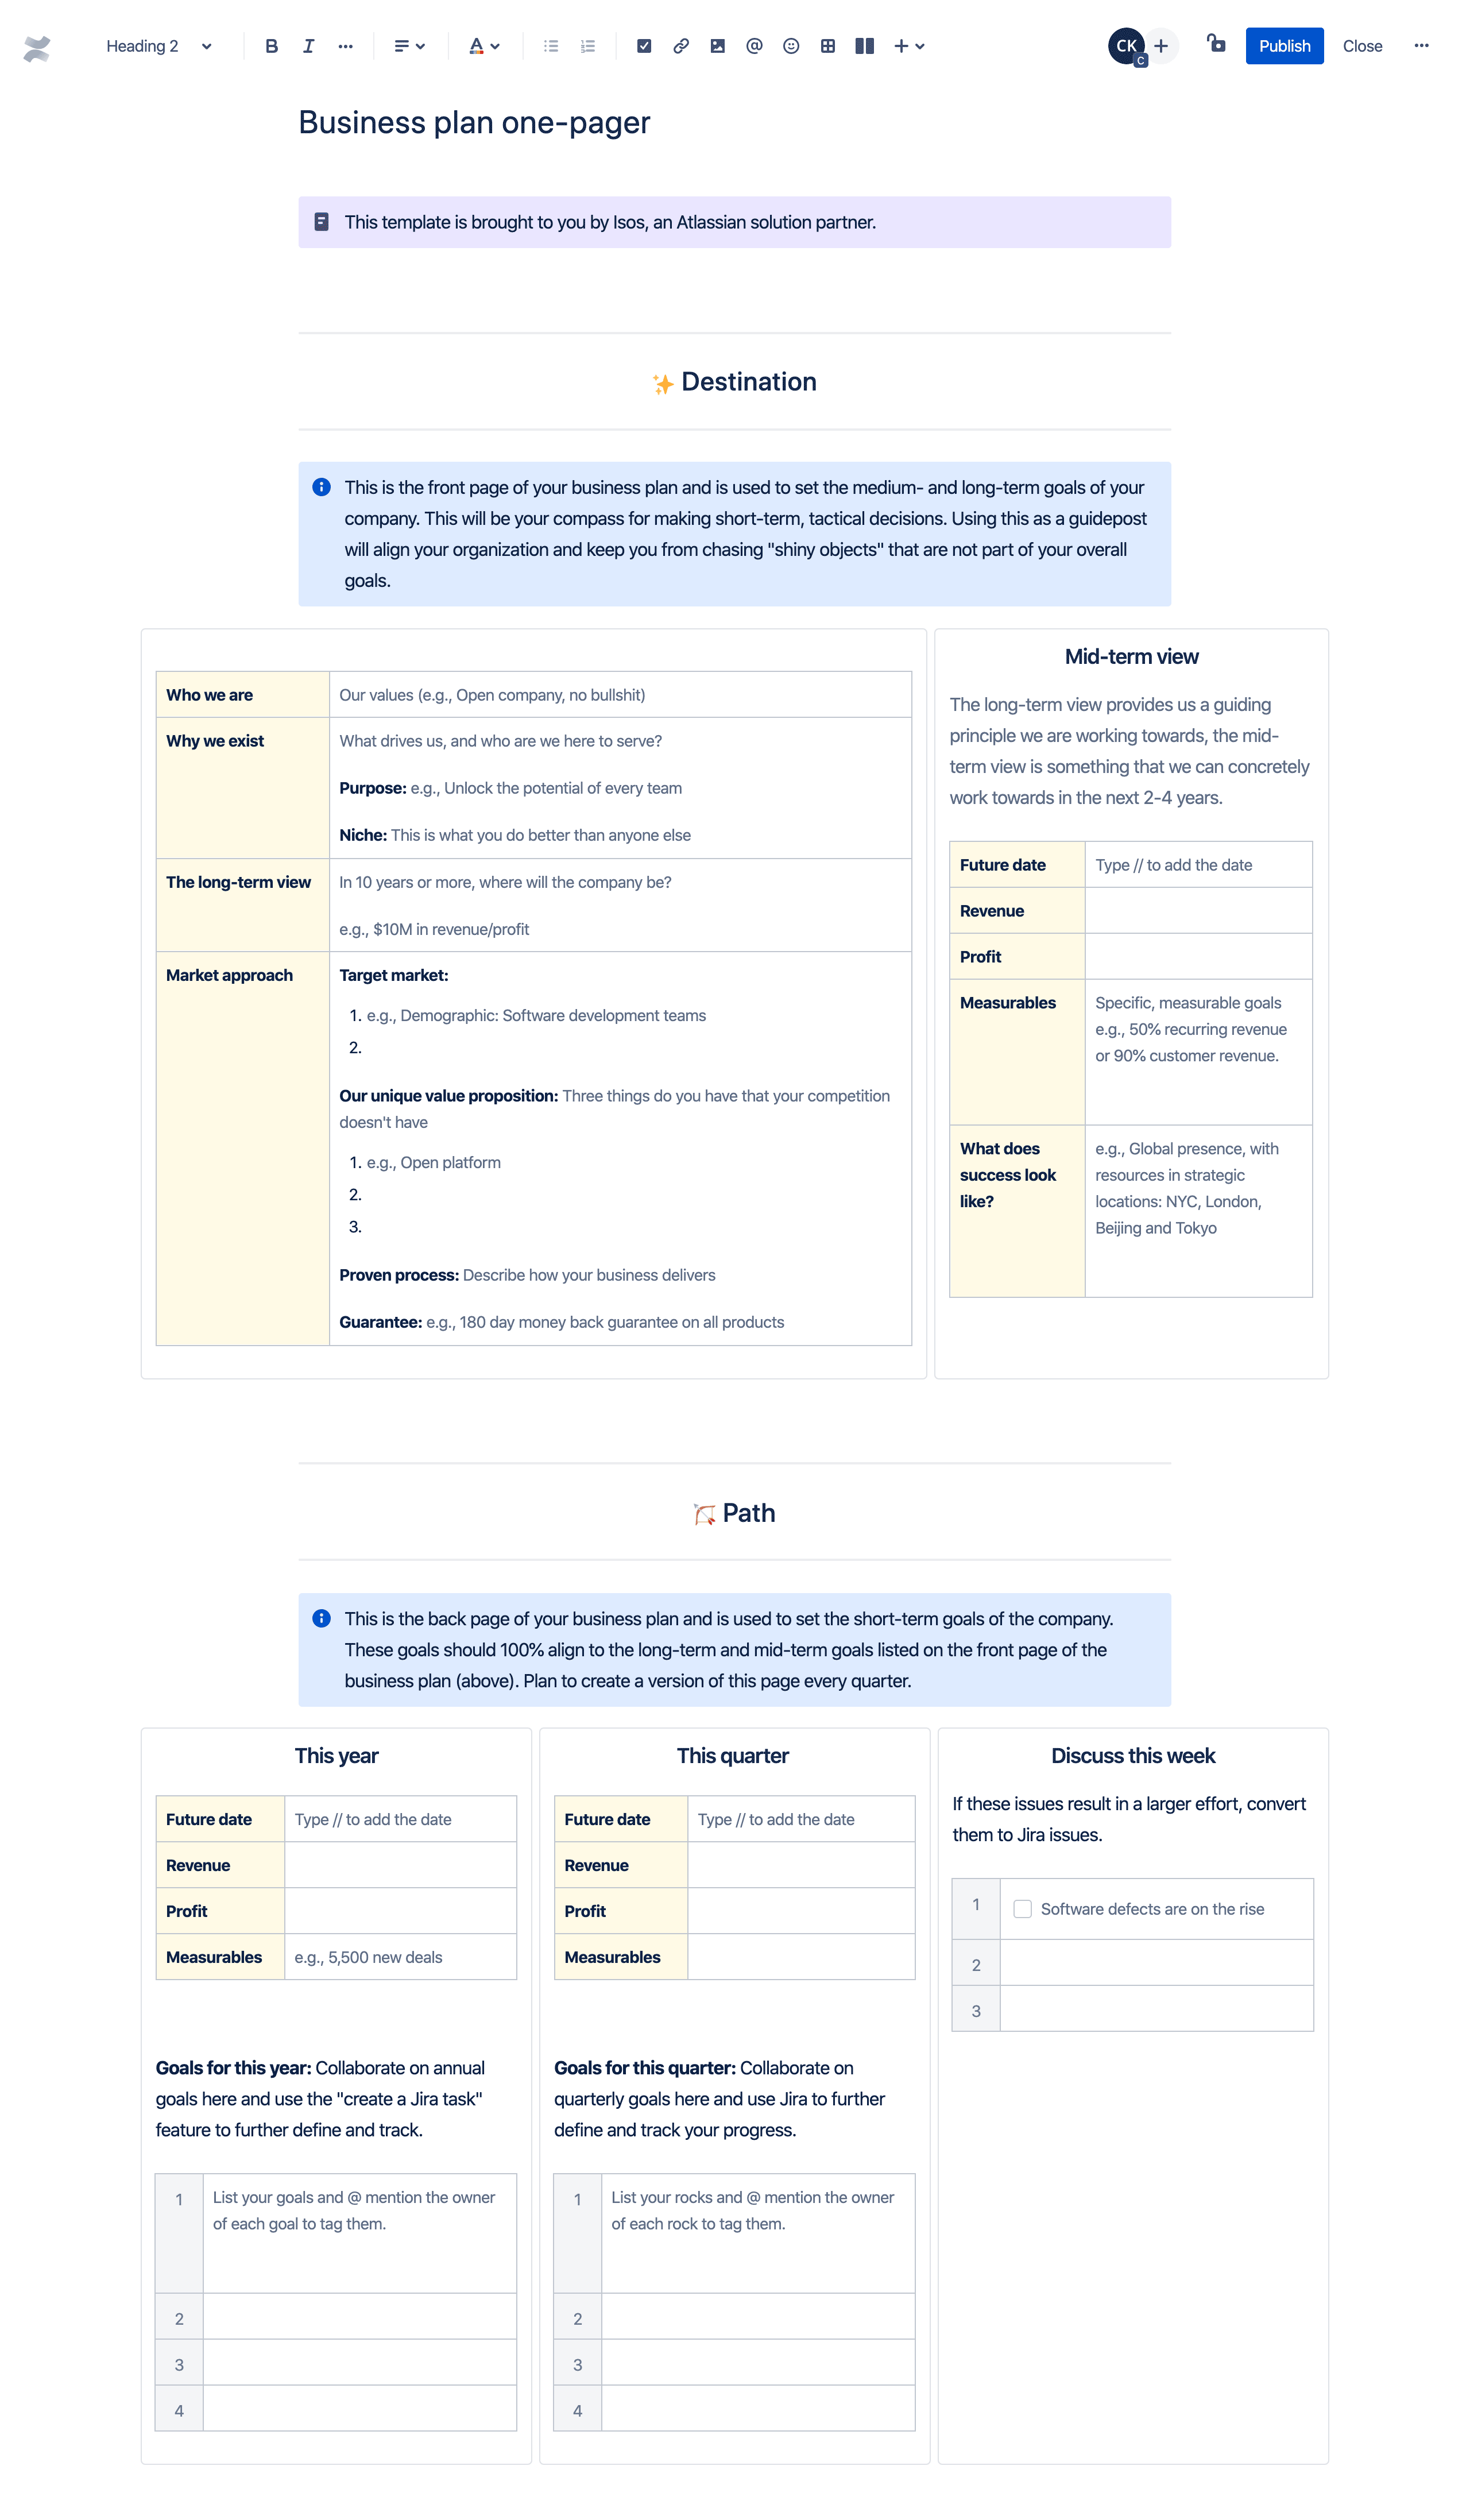  Business  plan  one pager template  Atlassian